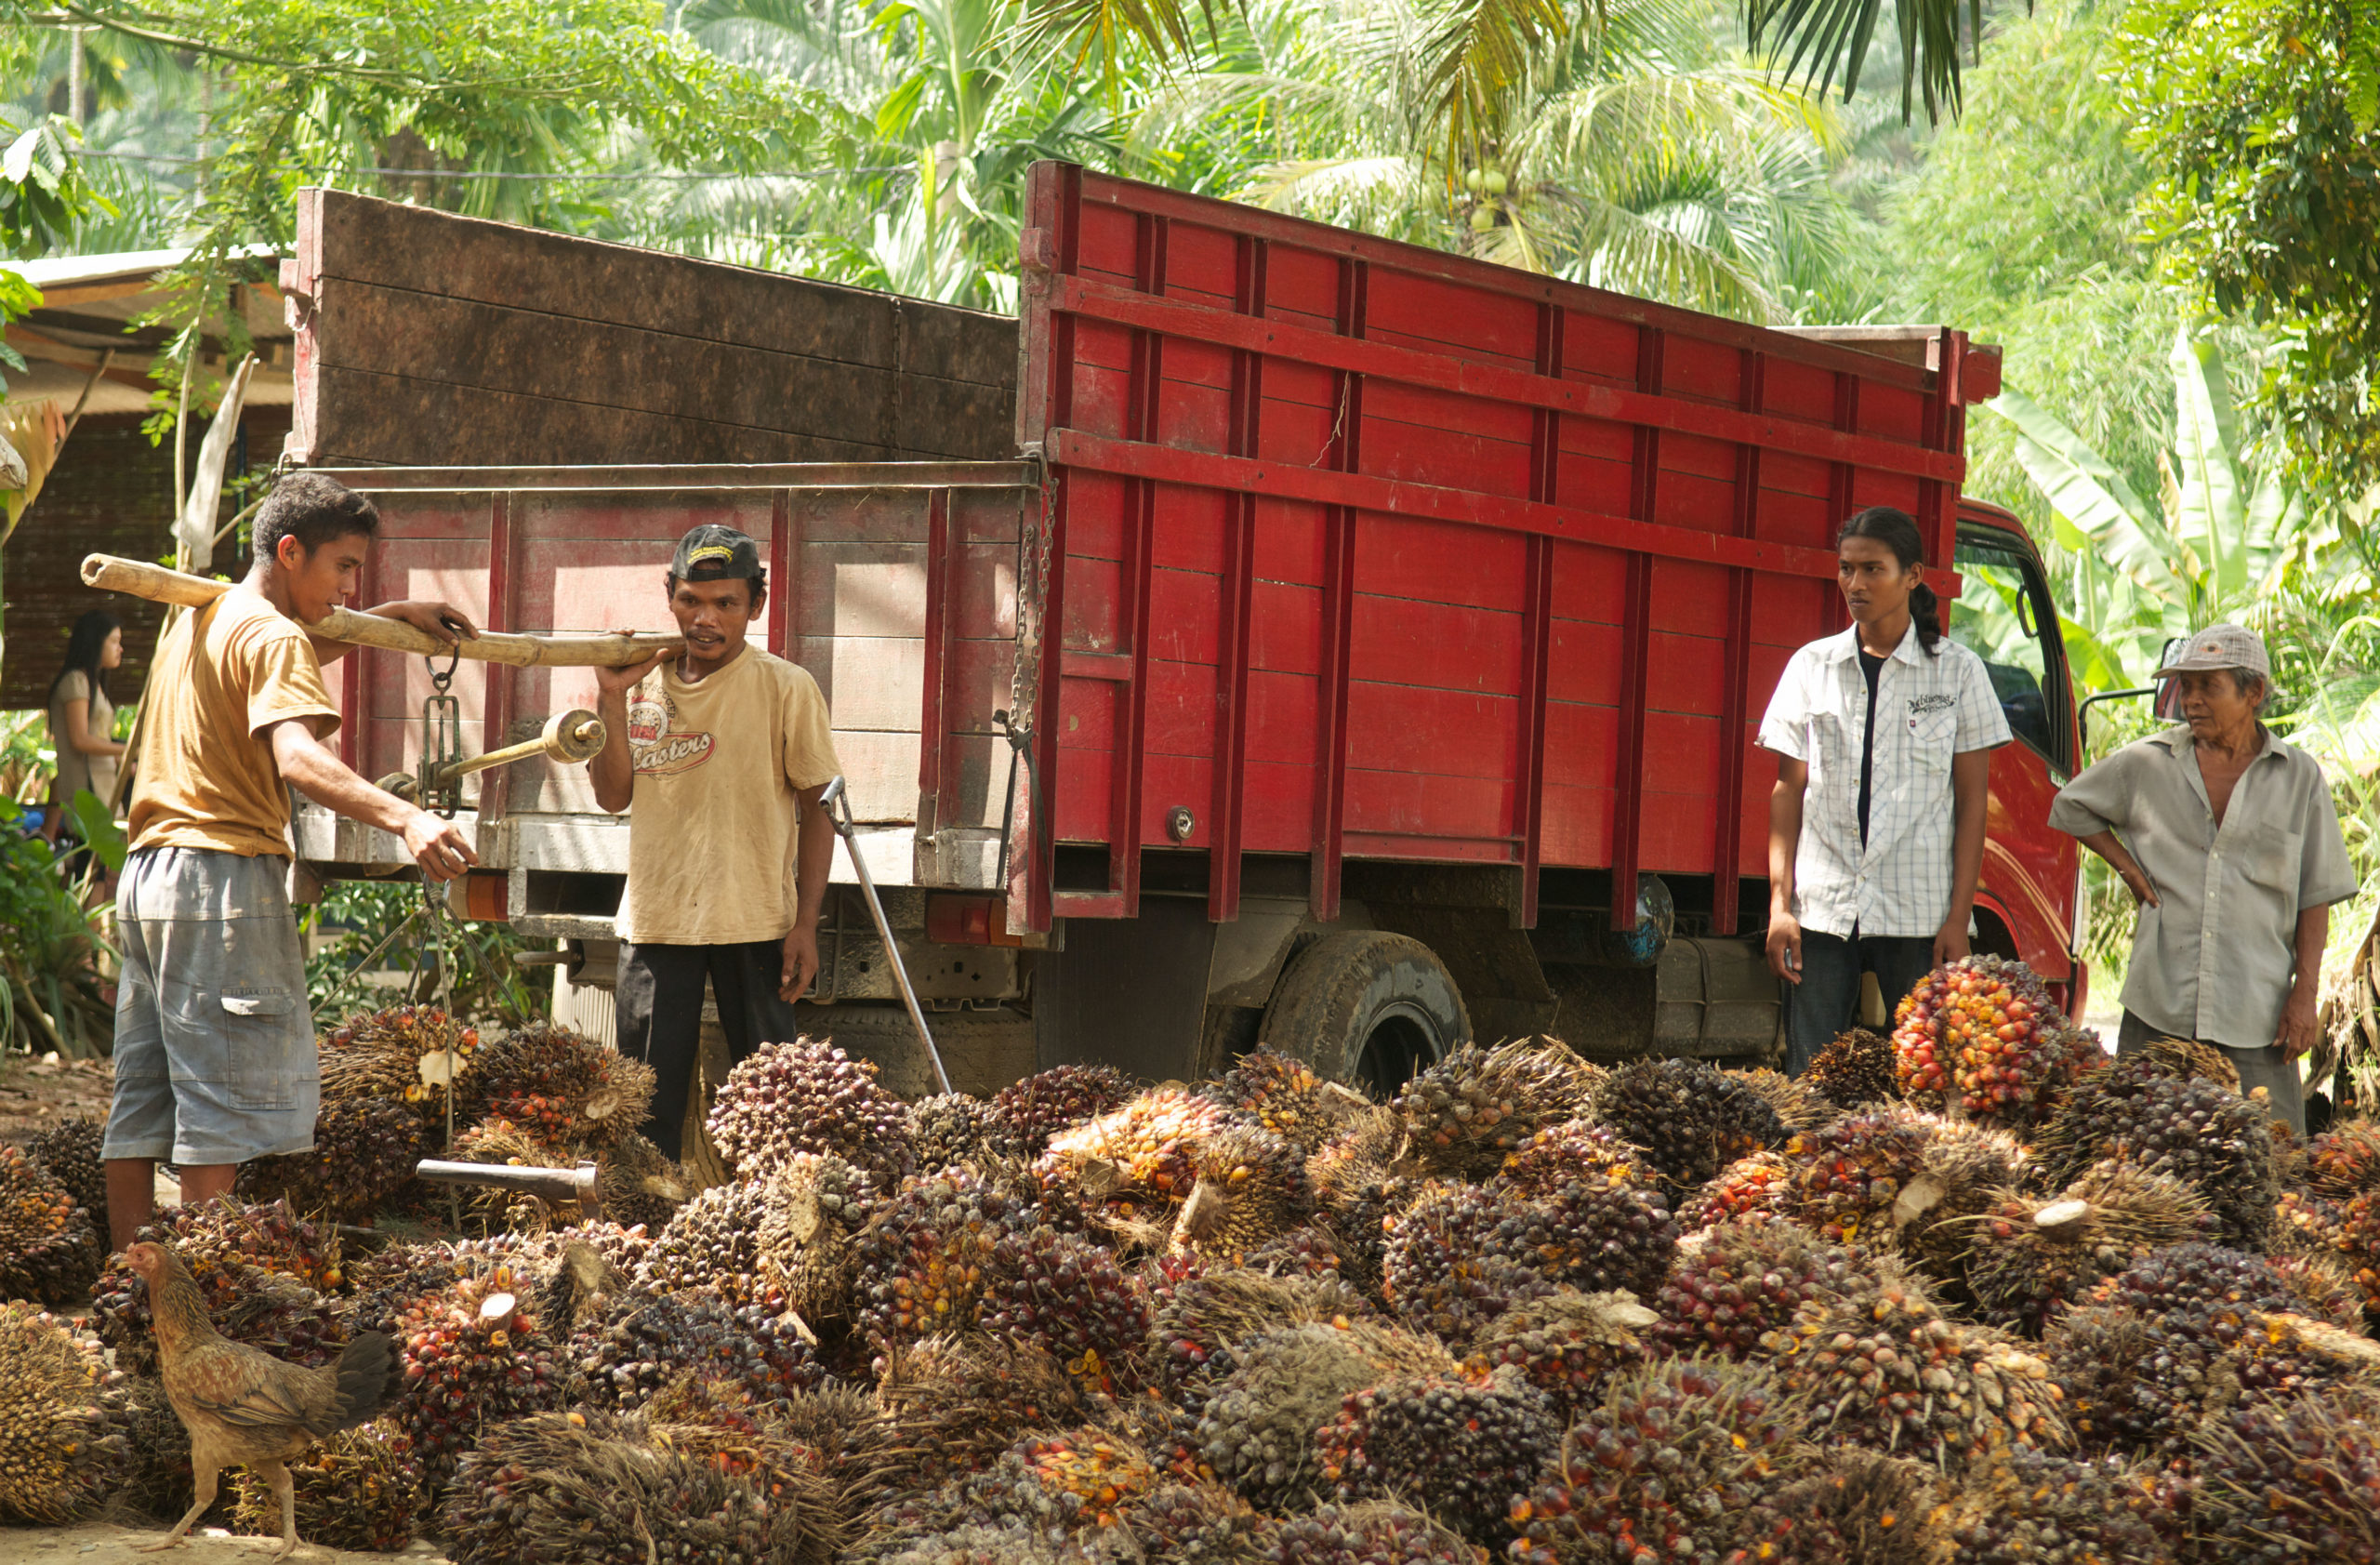 <p>Smallholders weigh their oil palm fruit before selling it to a middleman in Aceh, Indonesia (Image: Evan Bowen-Jones / Alamy)</p>“></p>



<p>Smallholders weigh their oil palm fruit before selling it to a middleman in Aceh, Indonesia (Image: Evan Bowen-Jones / Alamy)</p>



<p><a href=